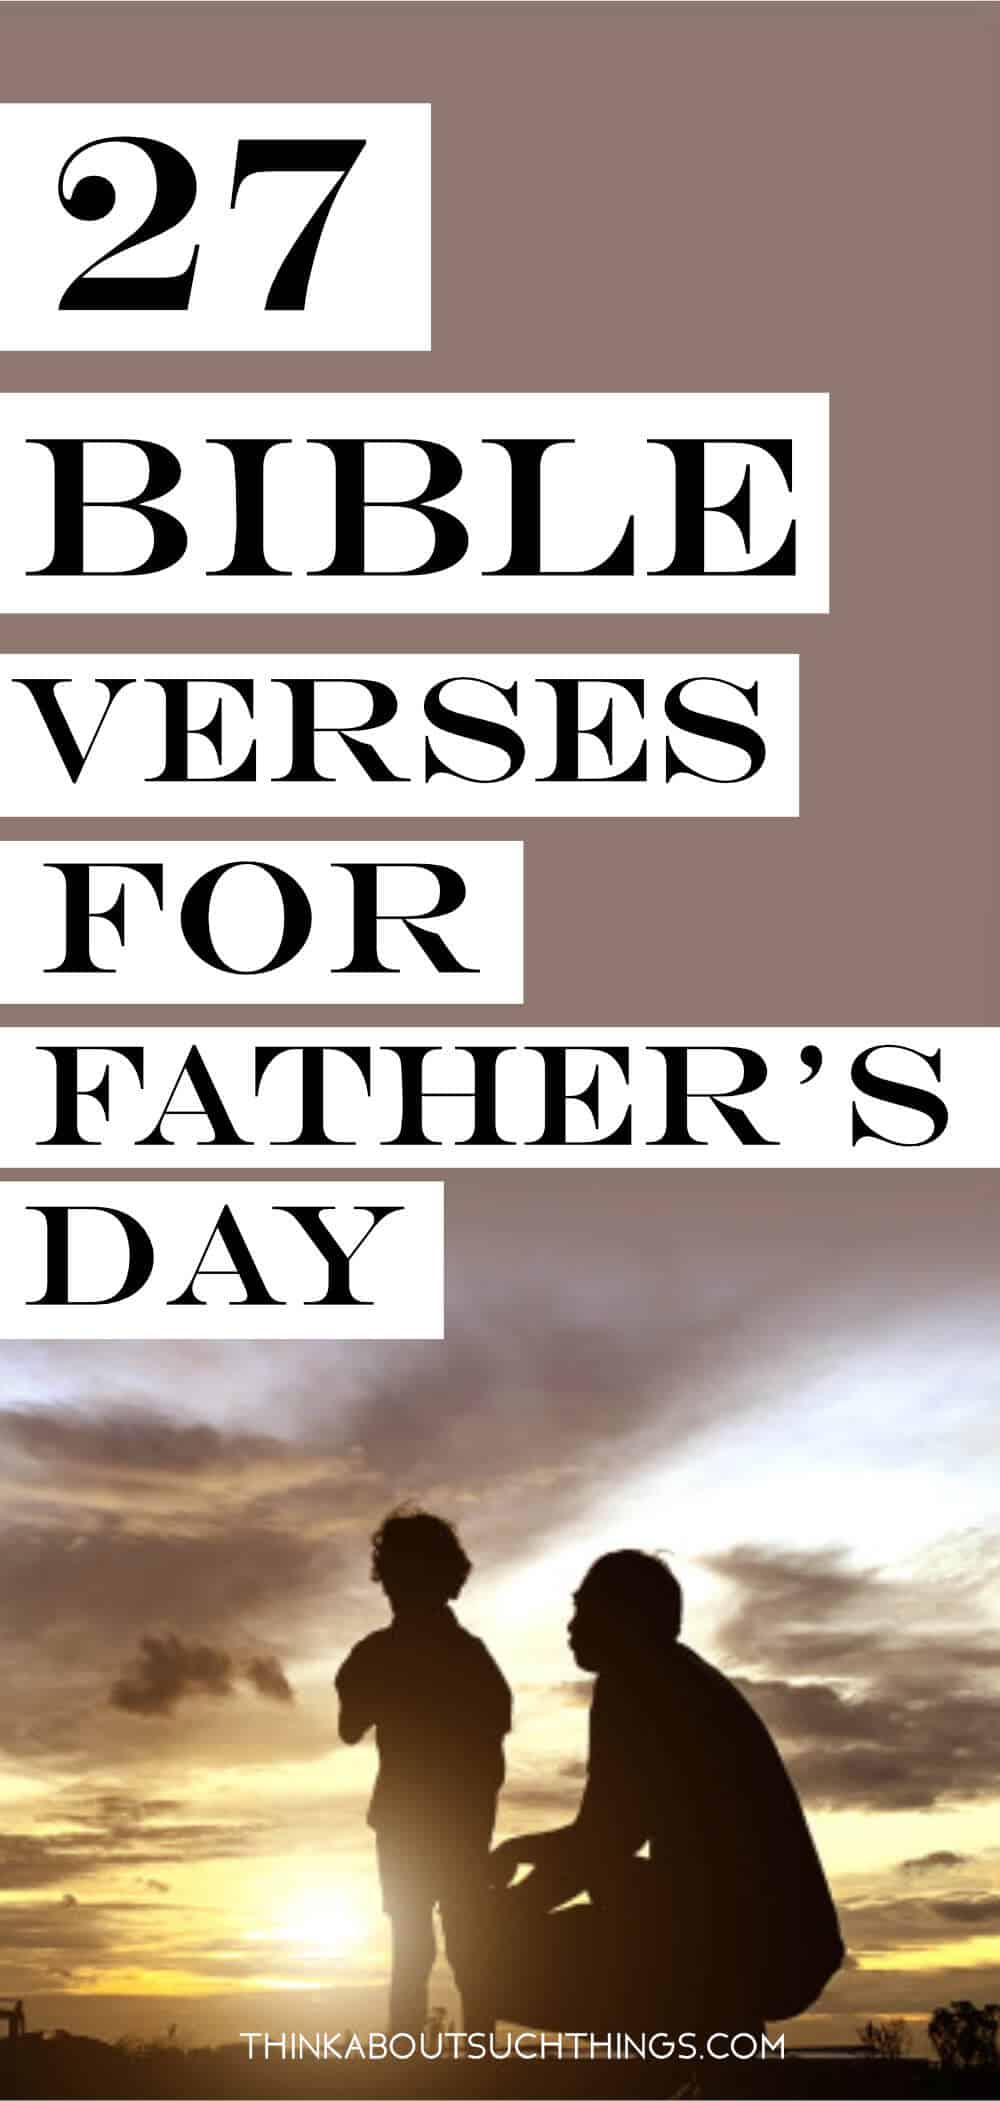 27-father-s-day-bible-verses-to-bless-dad-with-images-think-about